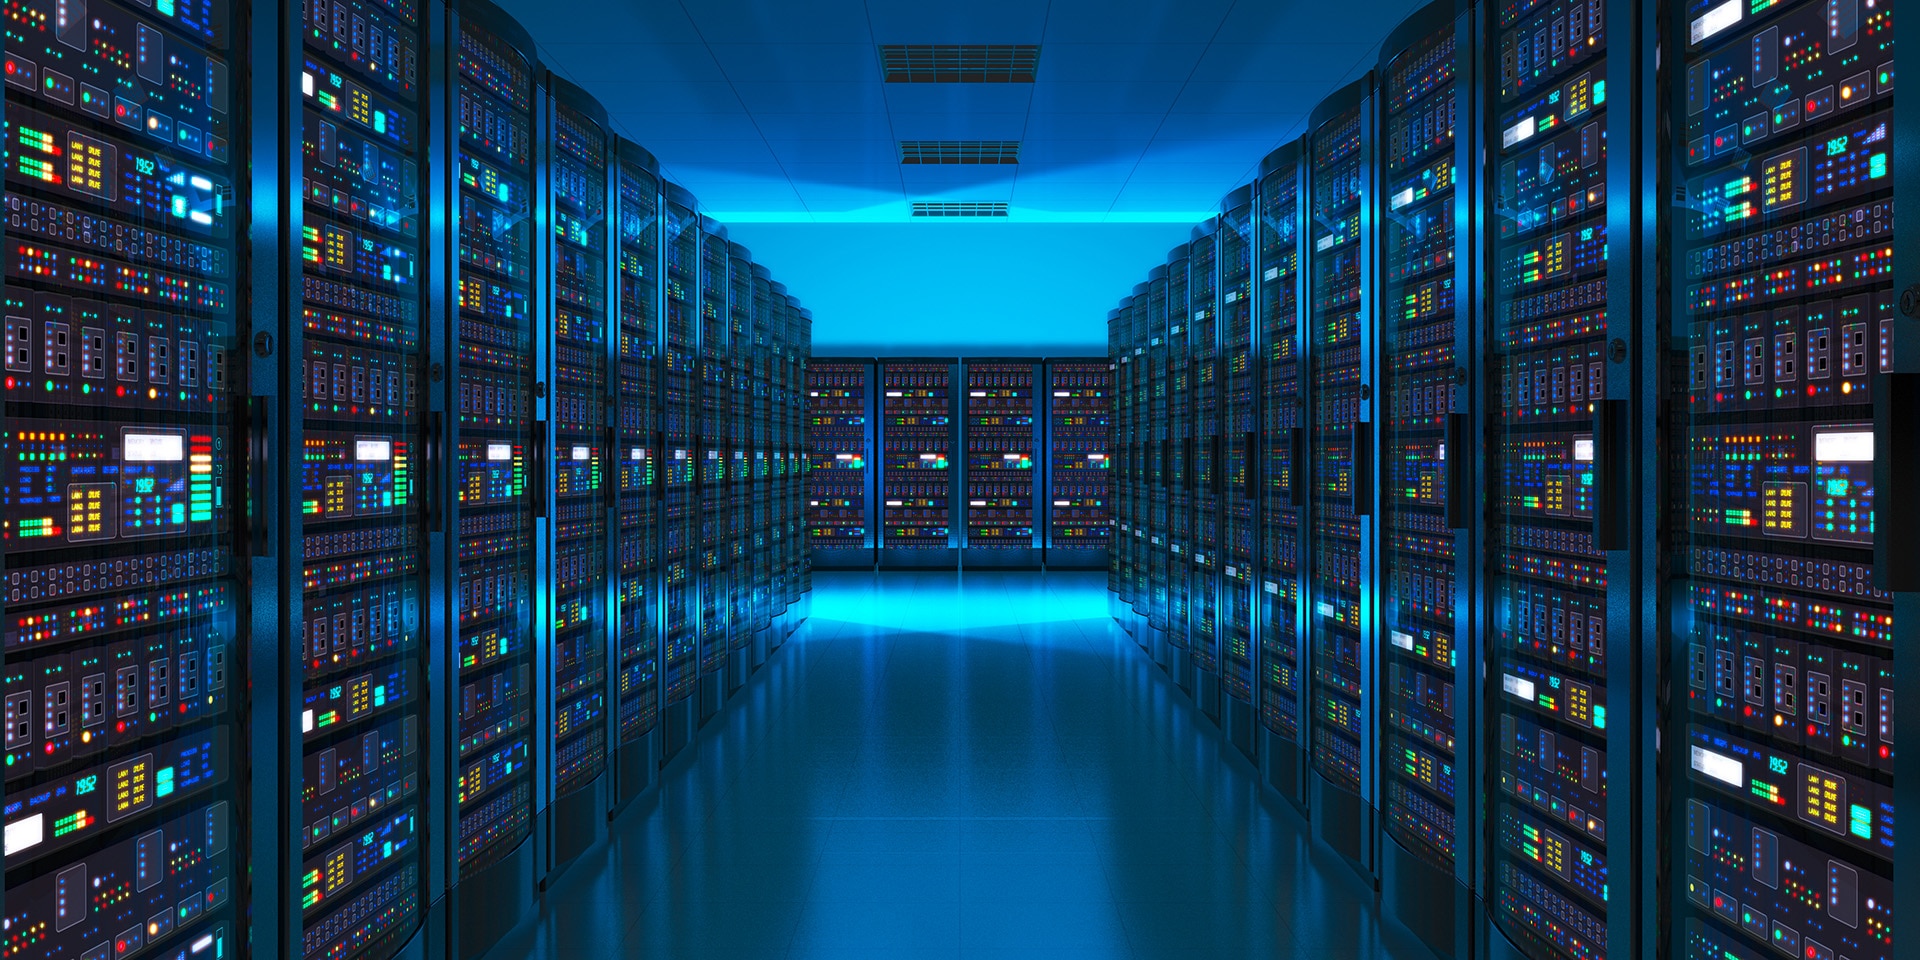 We see a darkened room with a blue glow containing rows of servers on which digital data is stored.